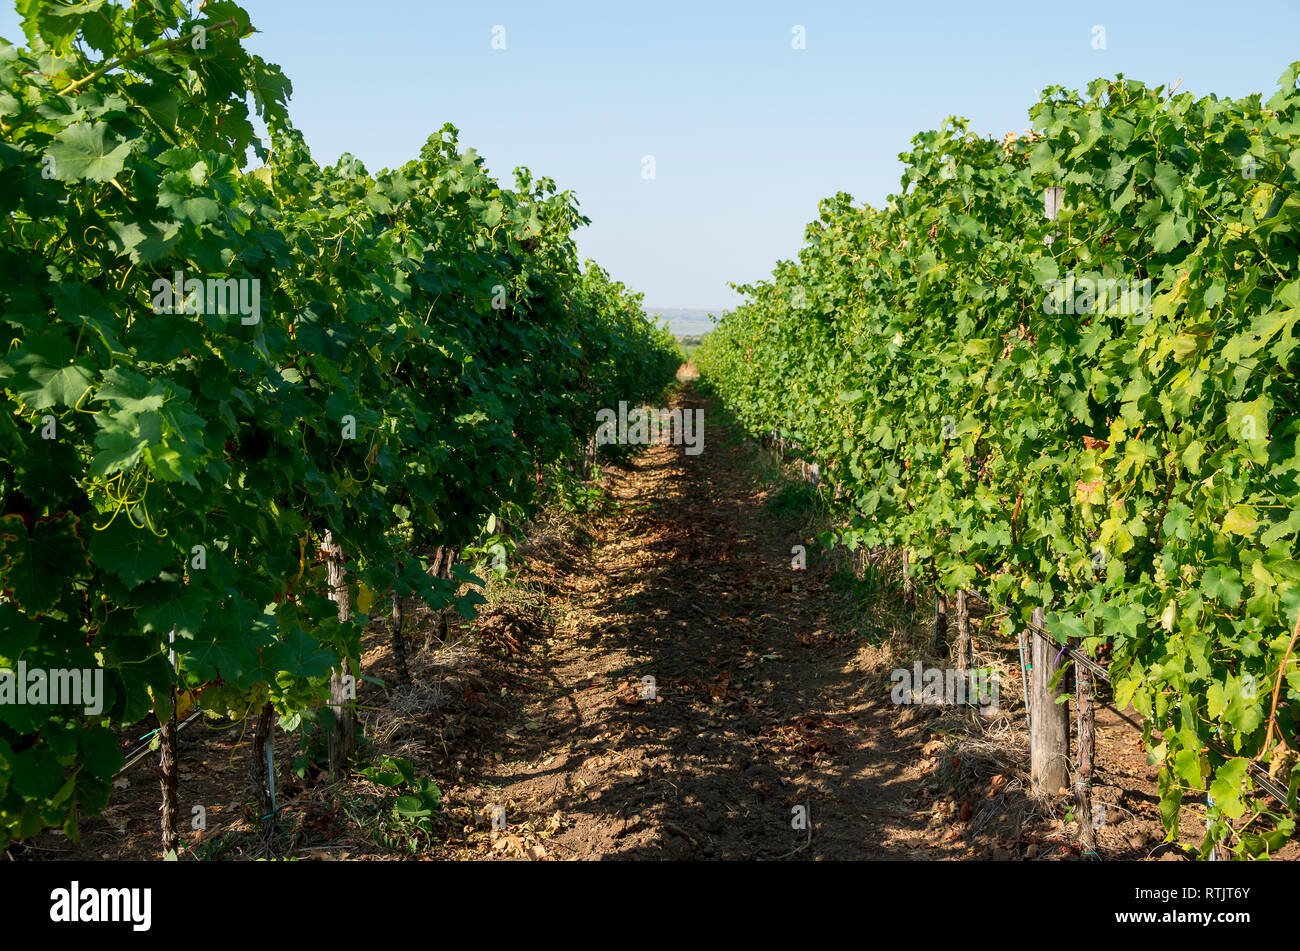 Viticulture. Vineyards rows. Vines with drip irrigation. Stock Photo